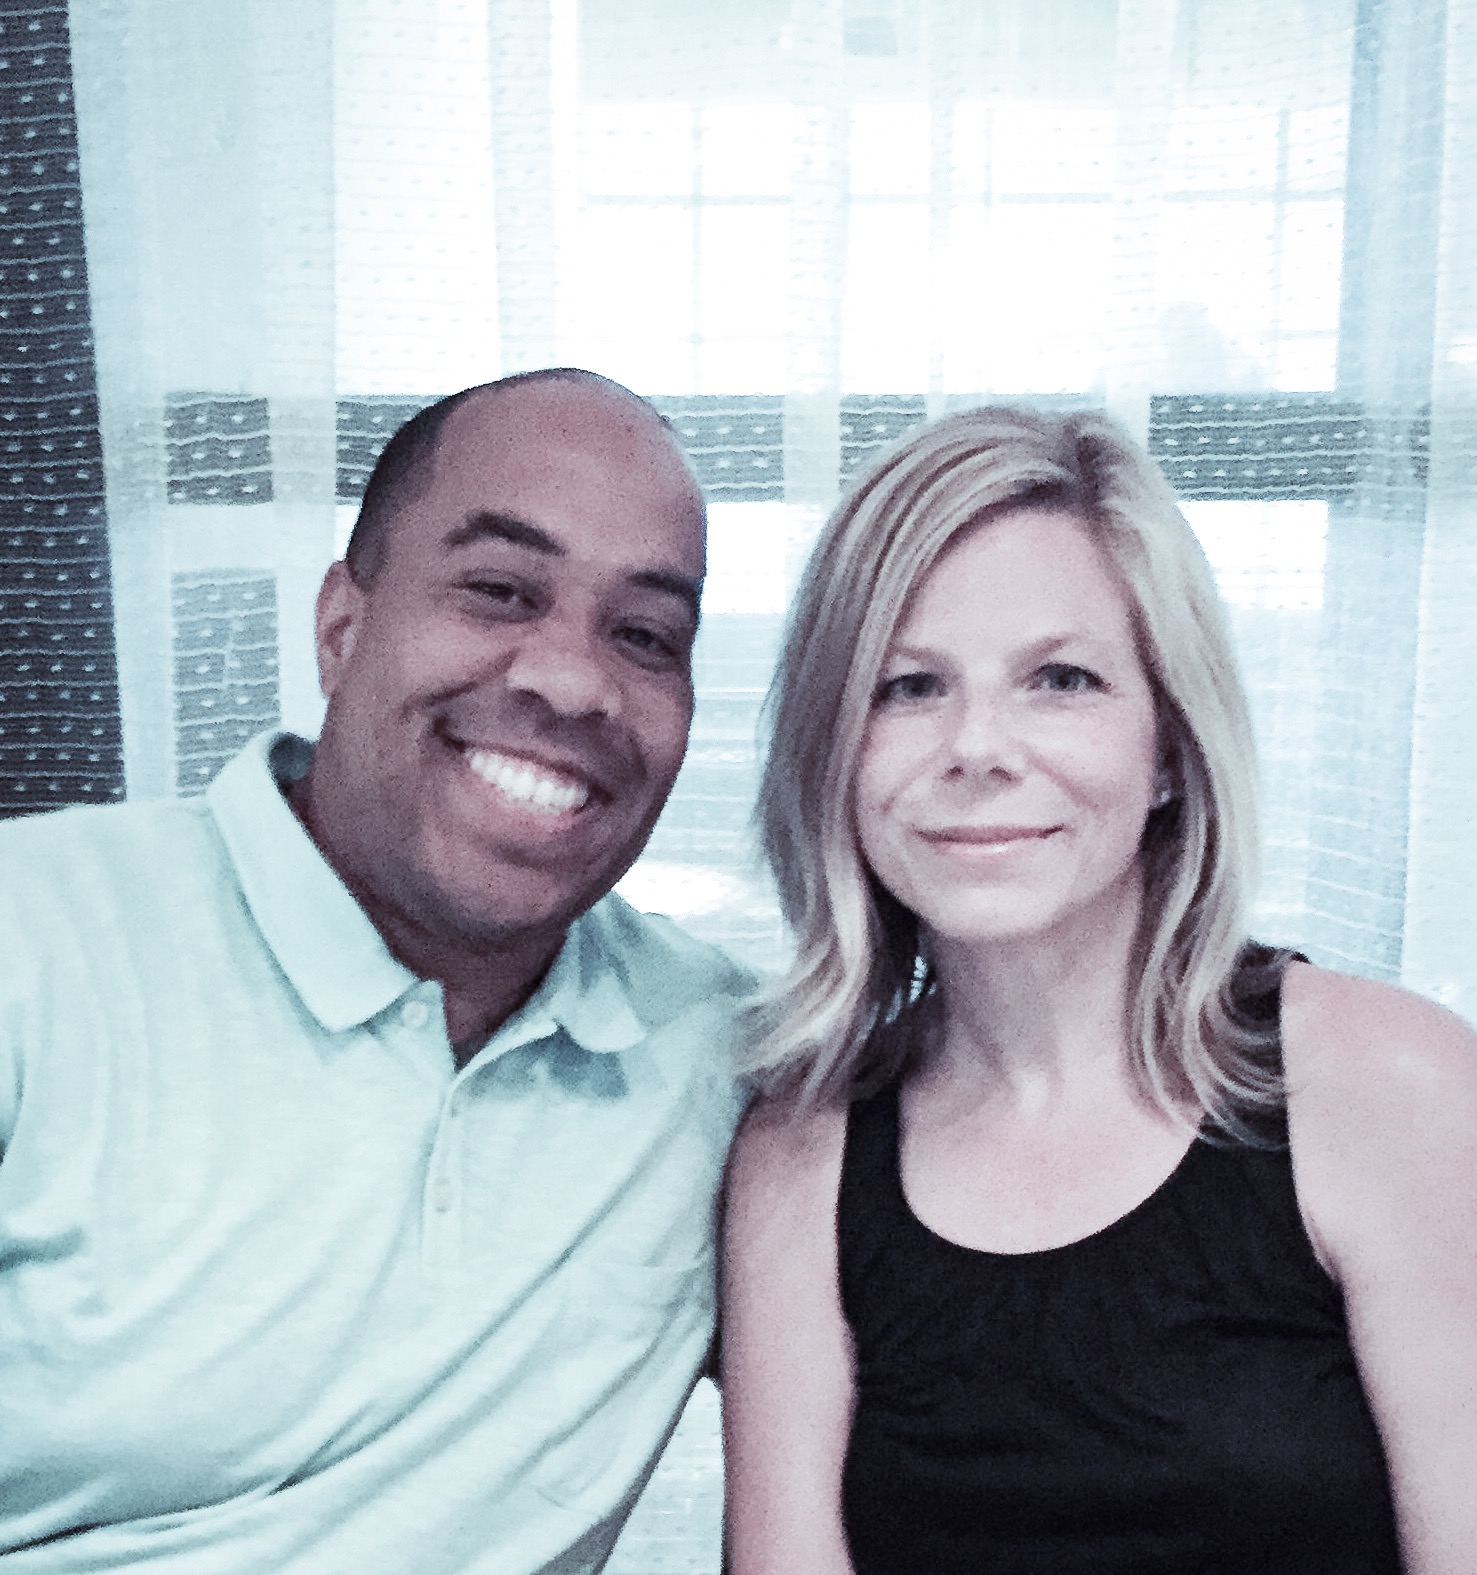 A-Game co-founders, Adrian Williams and Janelle Burch